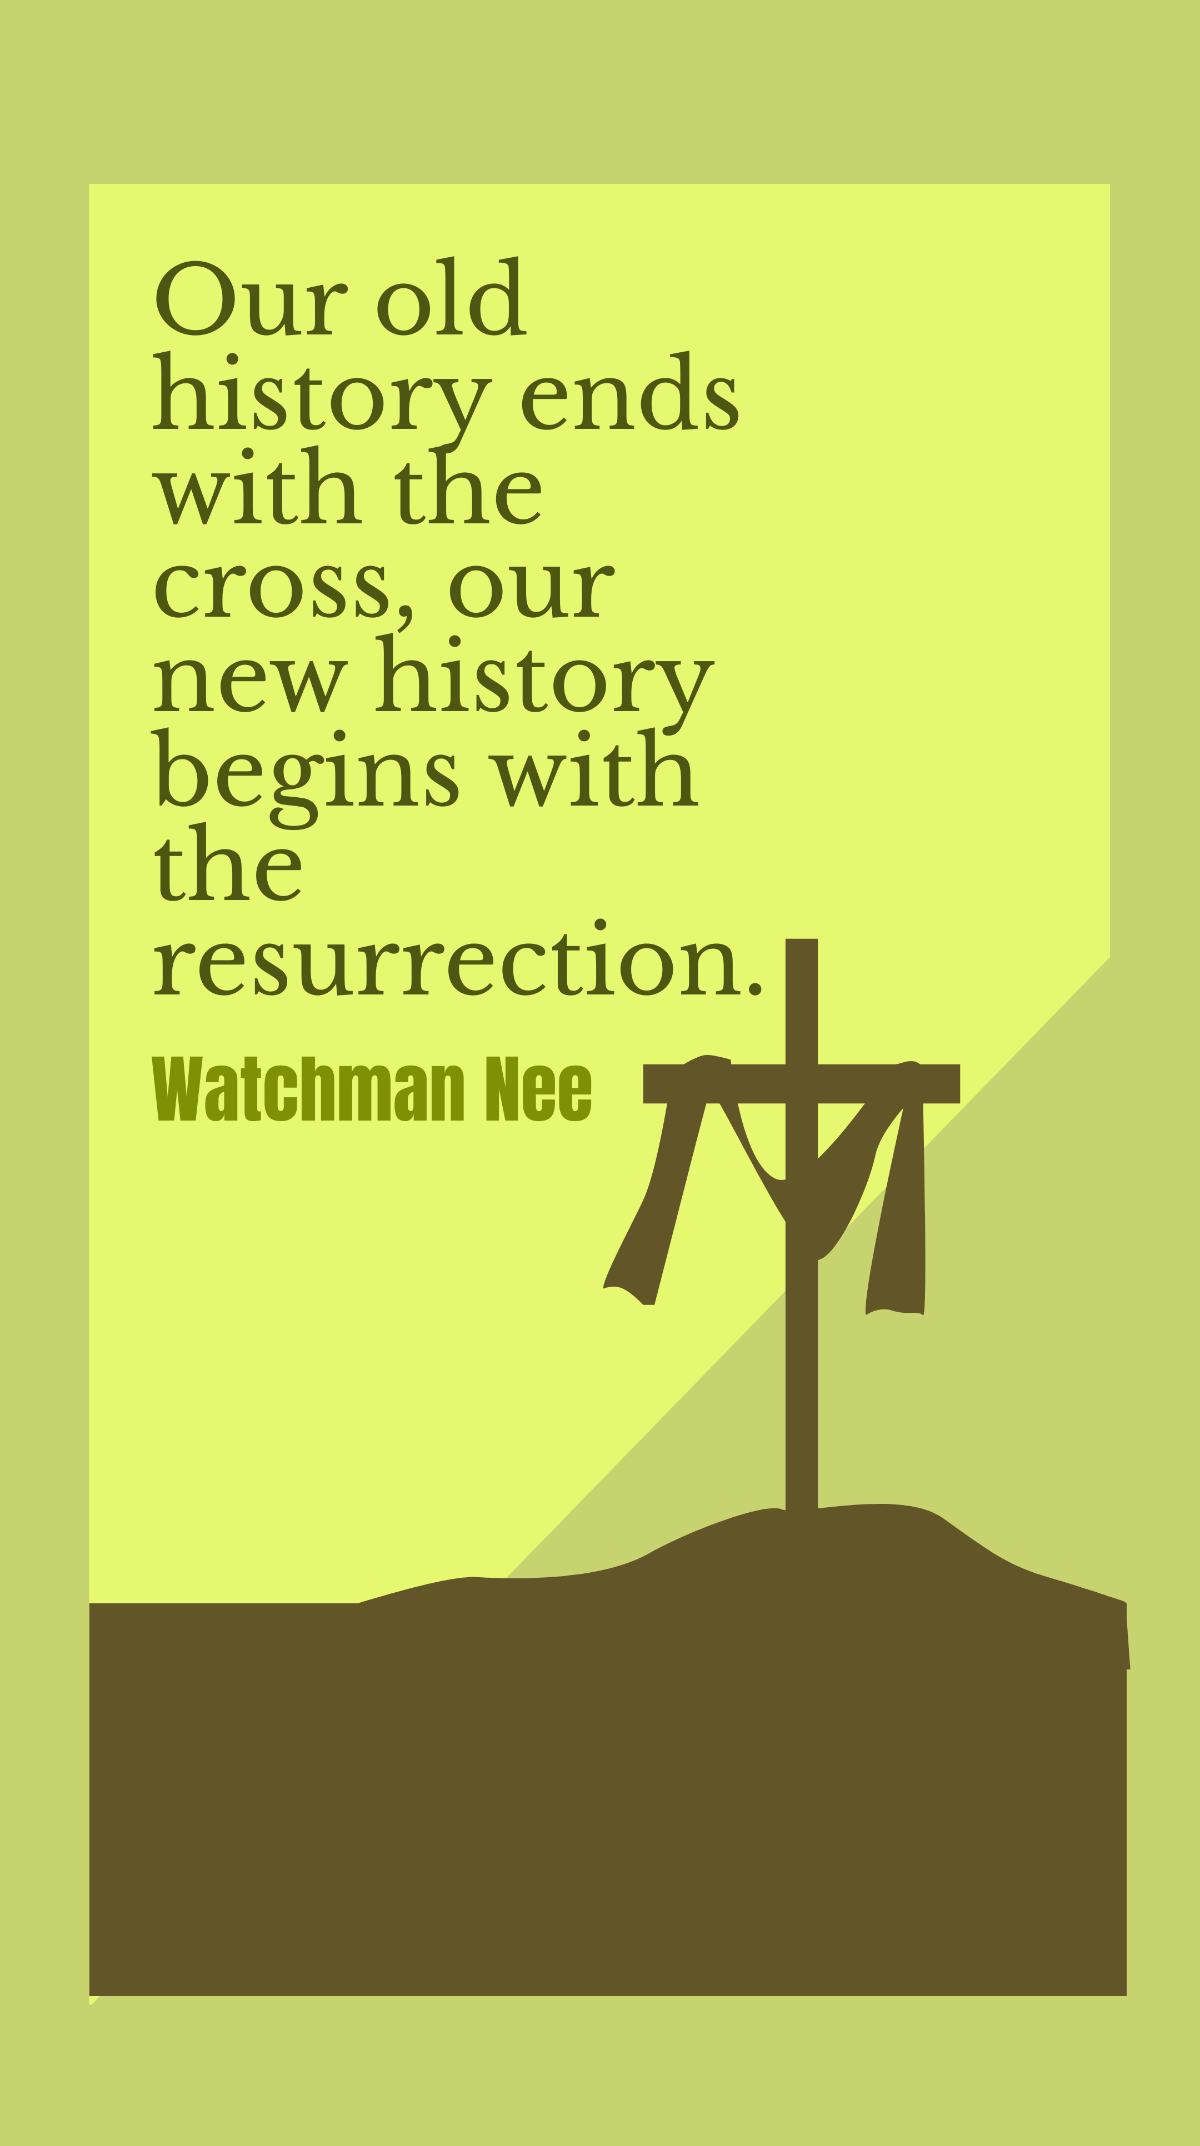 Watchman Nee - Our old history ends with the cross, our new history begins with the resurrection. Template